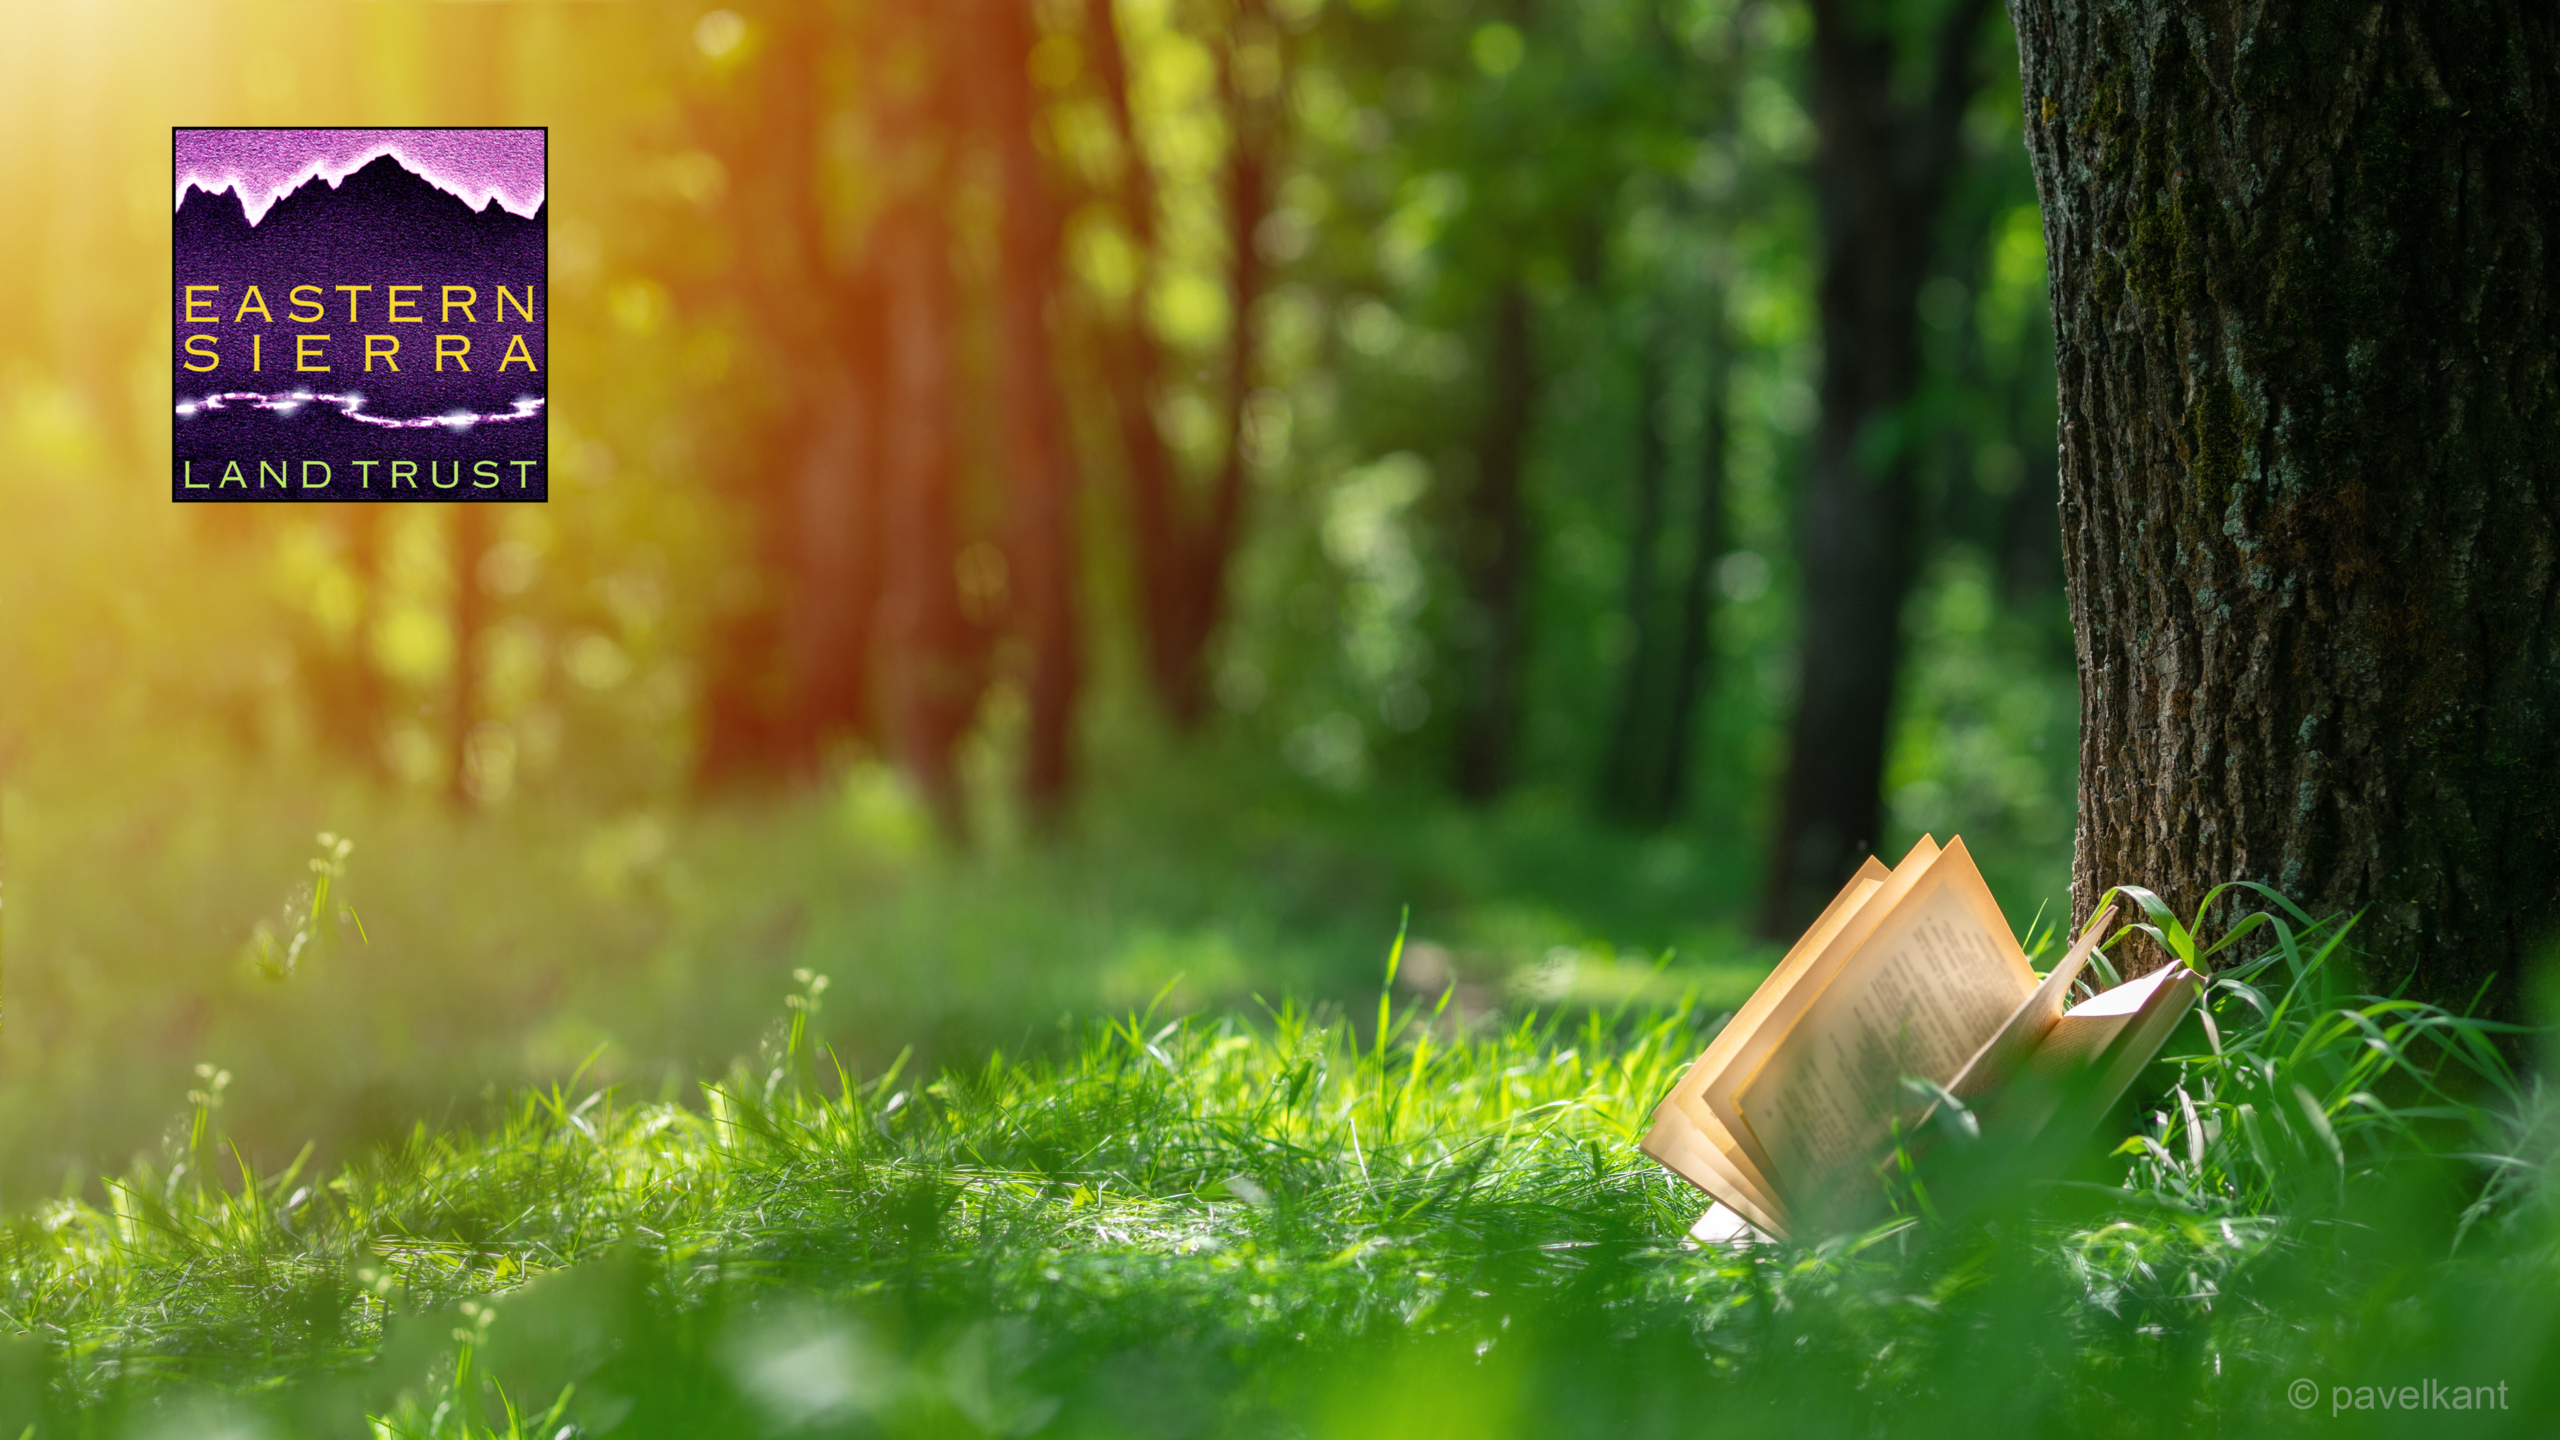 A book resting in grass in a very green forested area